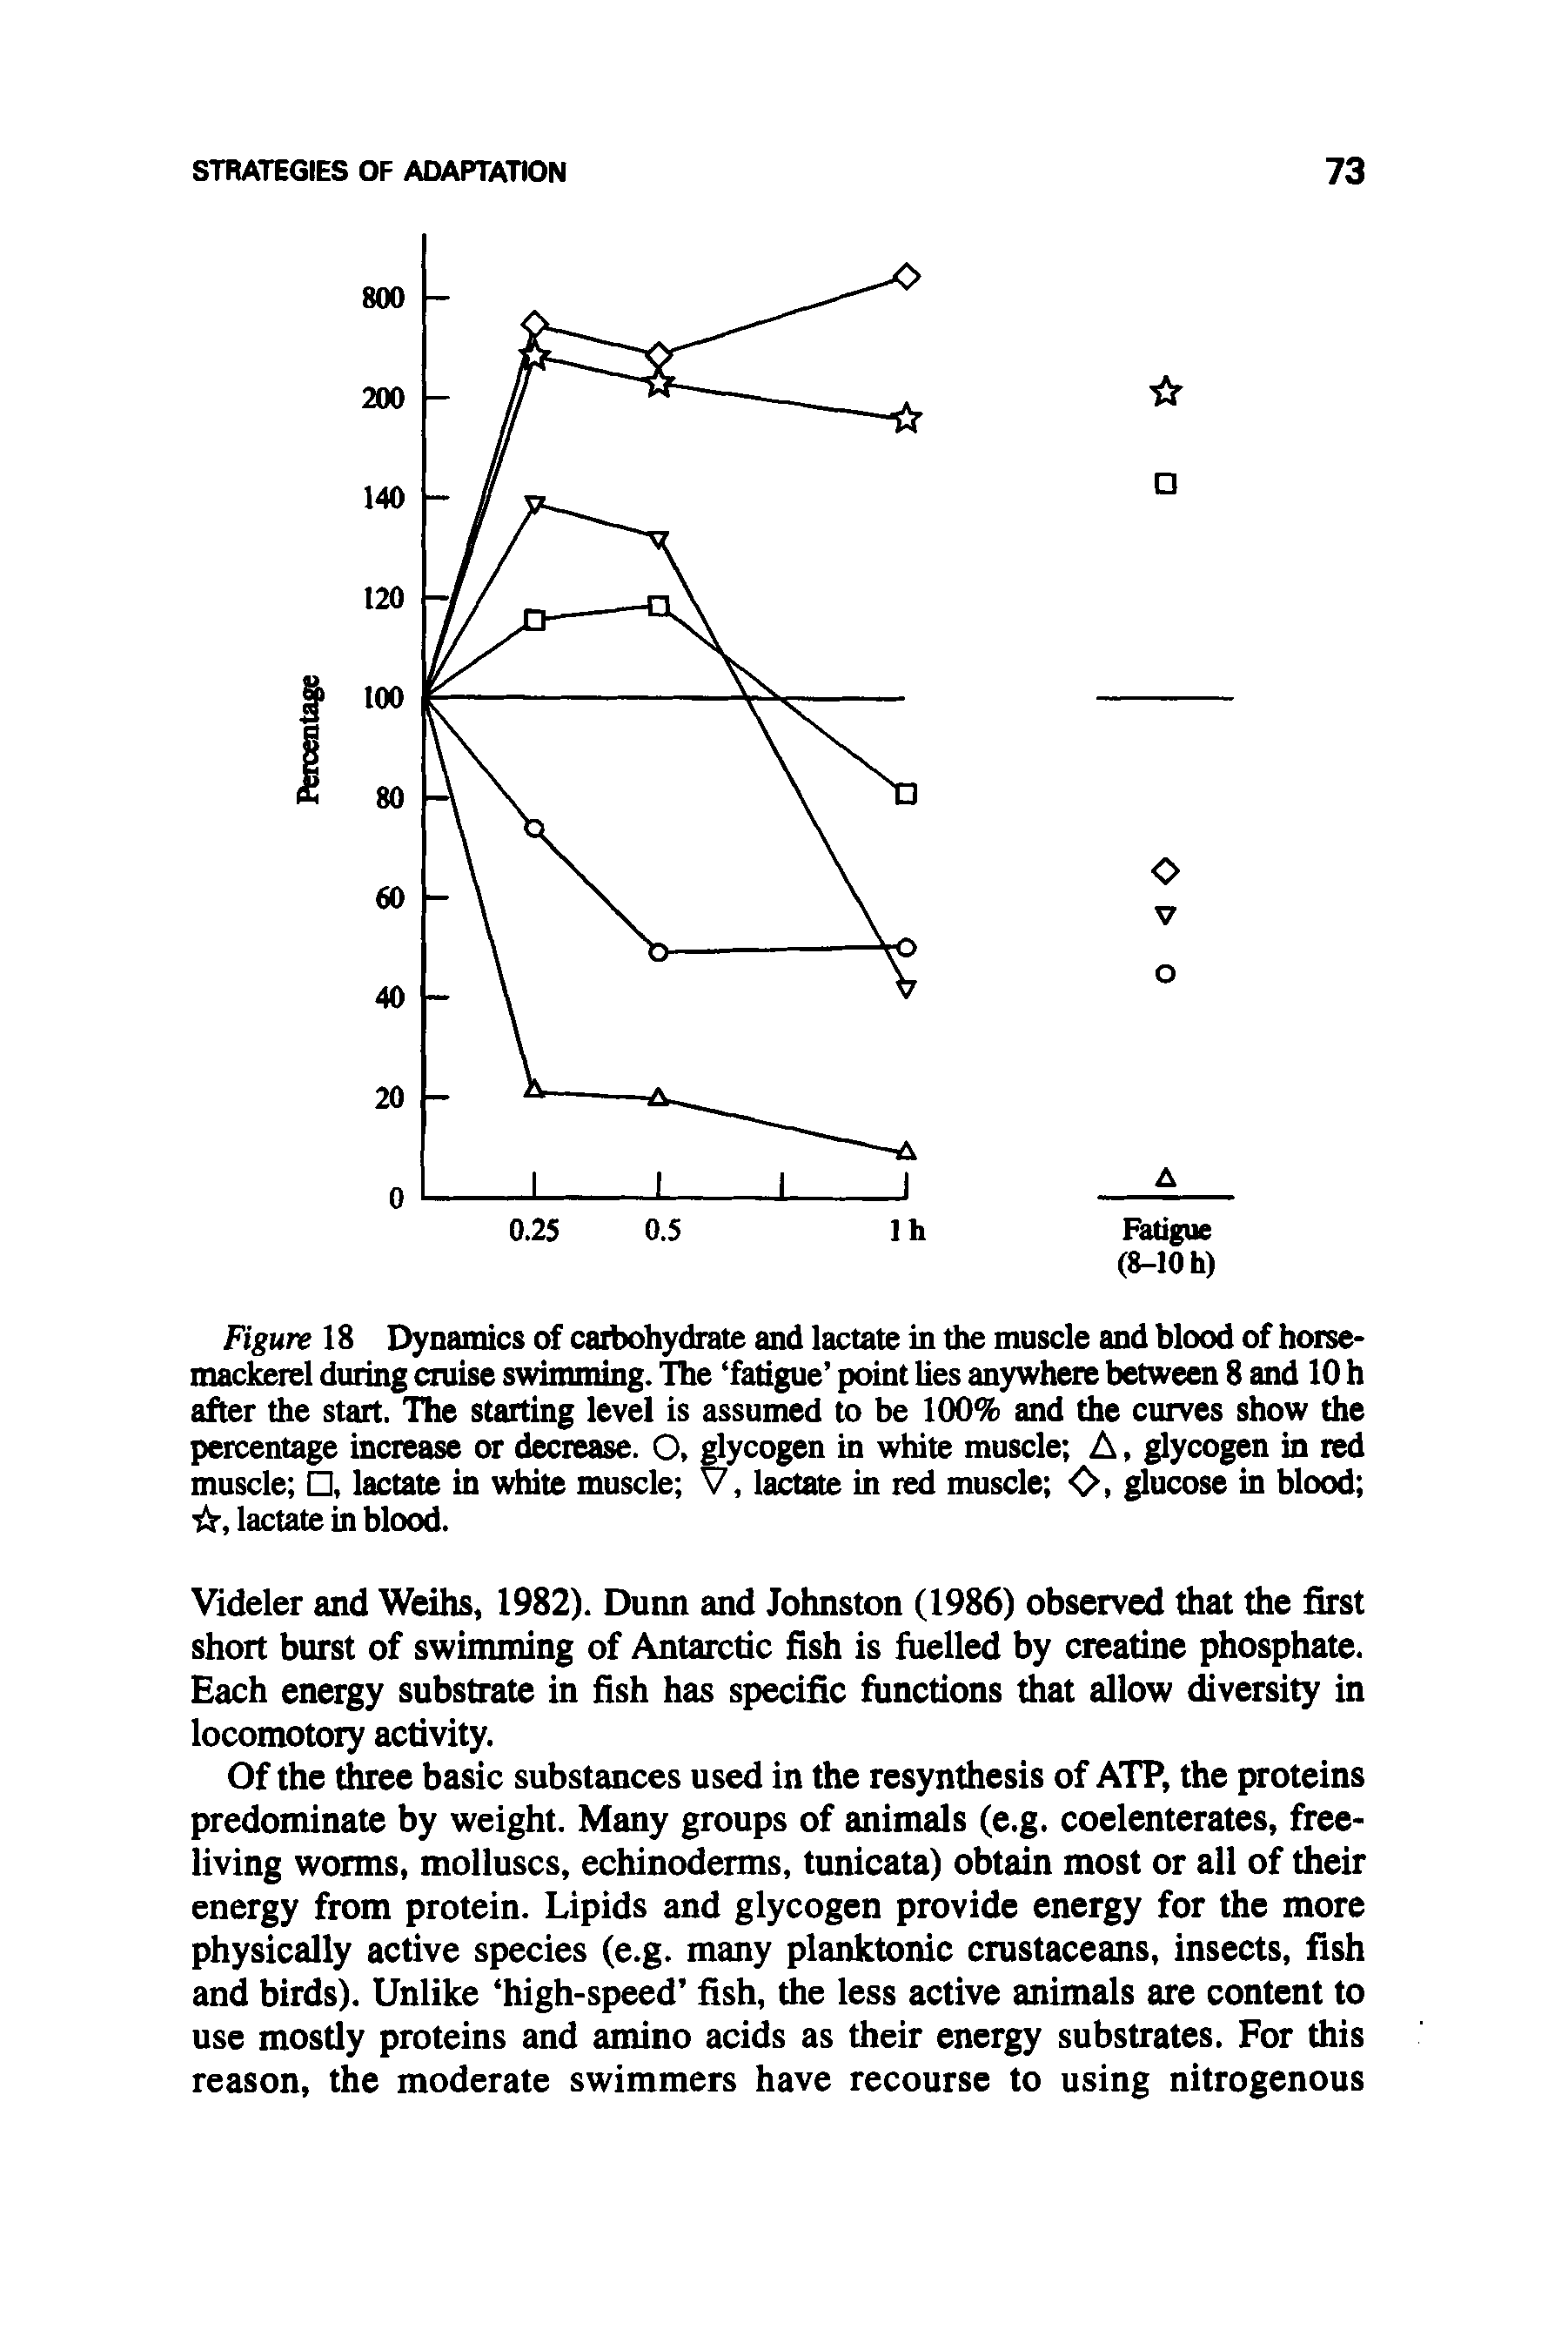 Figure 18 Dynamics of carbohydrate and lactate in the muscle and blood of horse-mackerel during cruise swimming. The fatigue point lies anywhere between 8 and 10 h after the start. The starting level is assumed to be 100% and the curves show the percentage increase or decrease. O, glycogen in white muscle A, glycogen in red muscle , lactate in white muscle V, lactate in red muscle O, glucose in blood , lactate in blood.